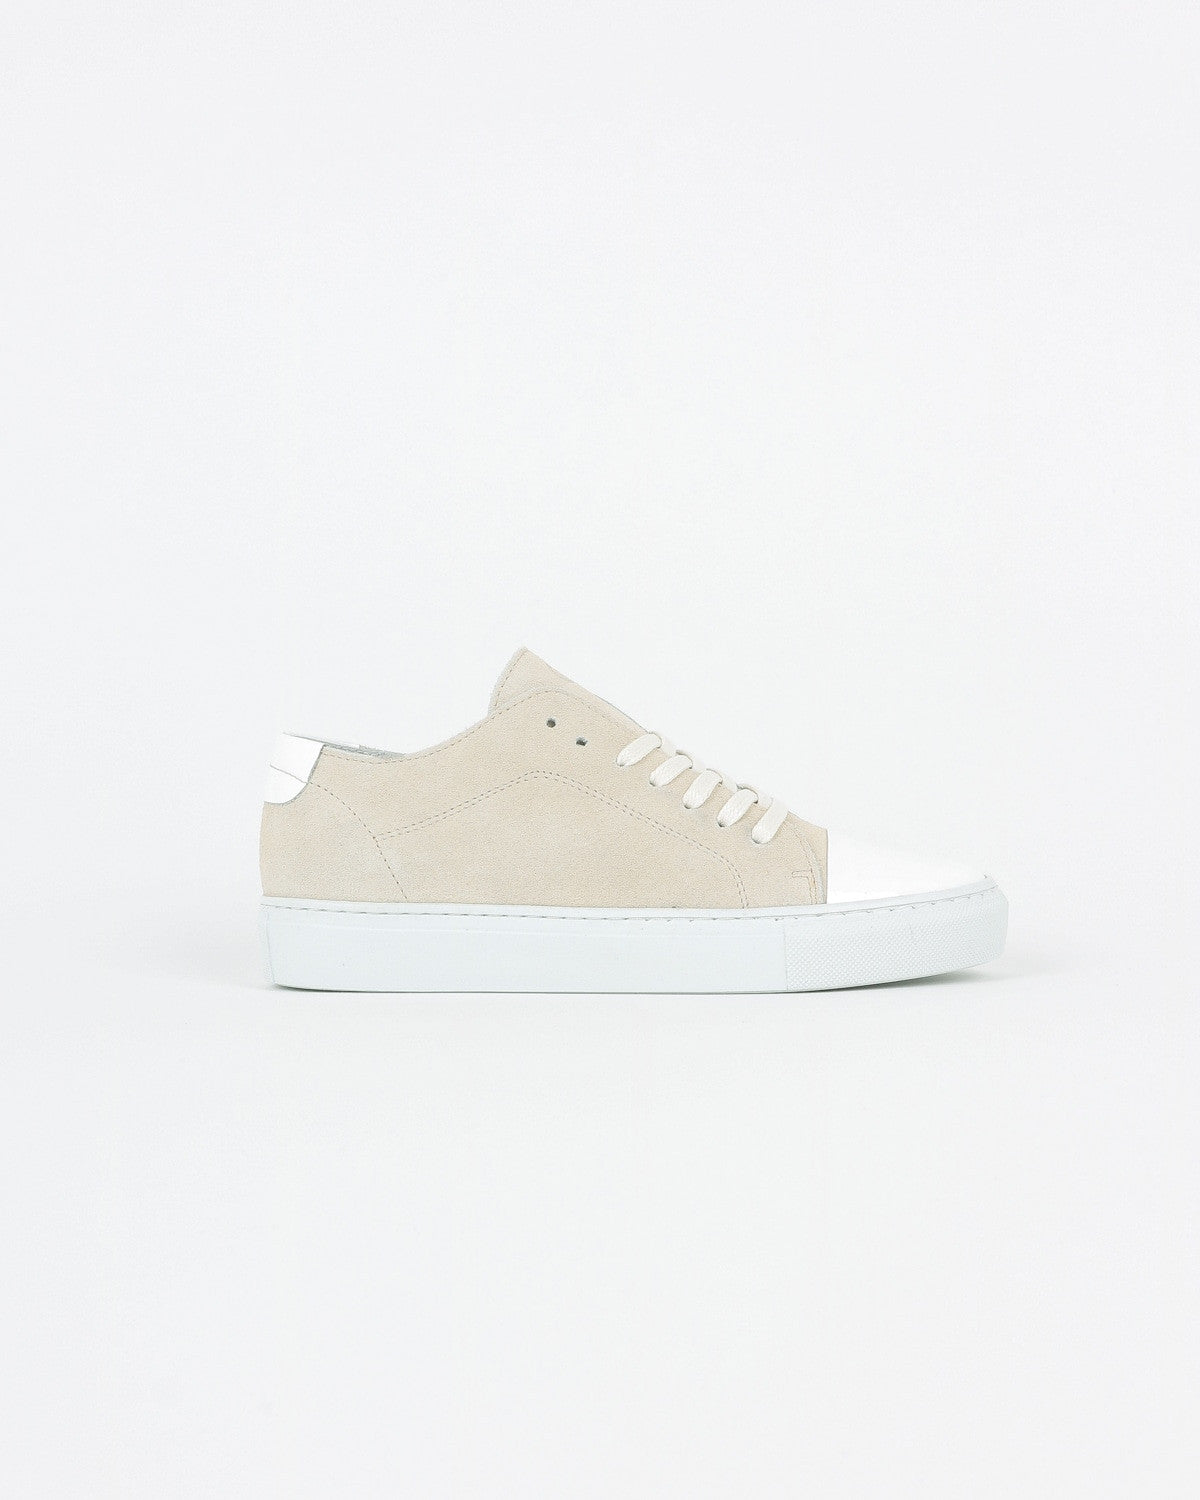 garment project_classic lace sneaker_offwhite suede_view_1_4